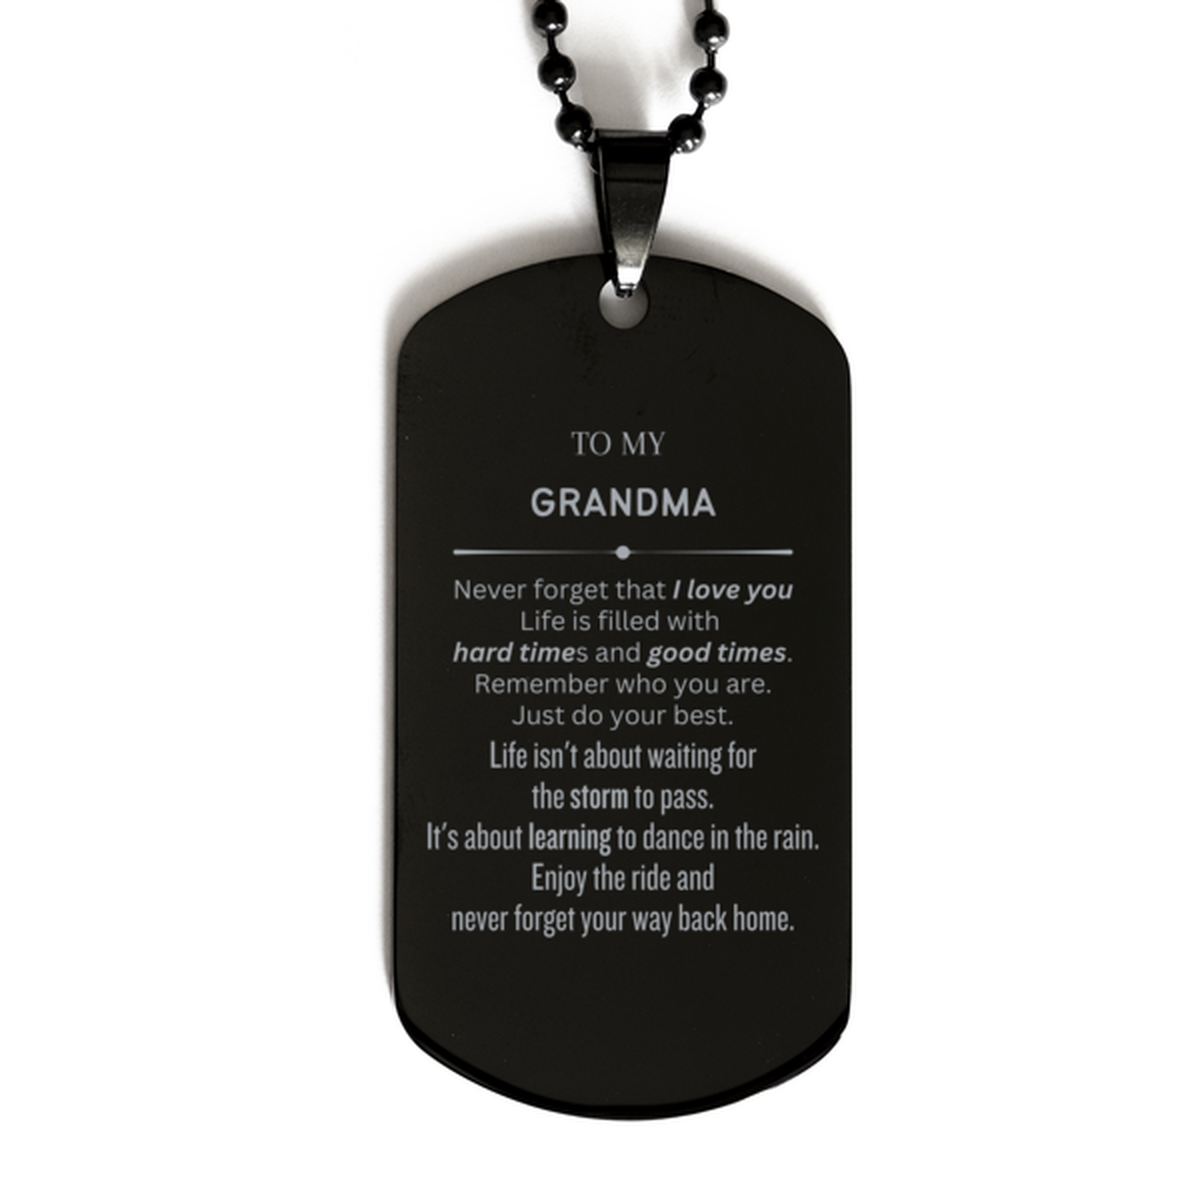 Christmas Grandma Black Dog Tag Gifts, To My Grandma Birthday Thank You Gifts For Grandma, Graduation Unique Gifts For Grandma To My Grandma Never forget that I love you life is filled with hard times and good times. Remember who you are. Just do your bes